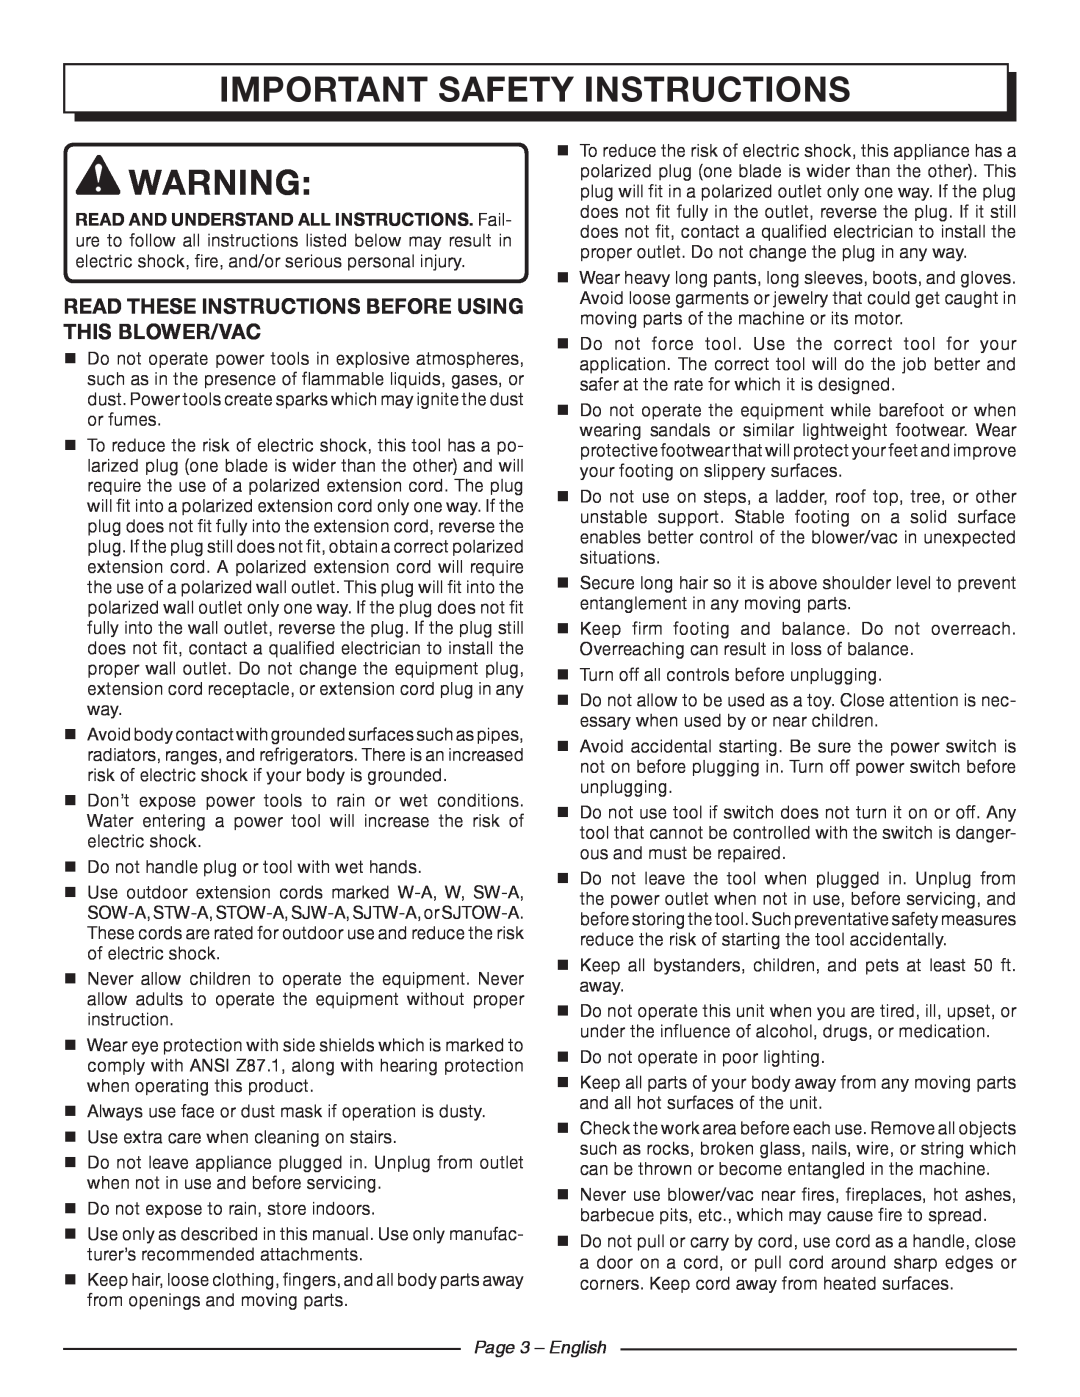 Homelite UT42120 important safety instructions, READ THESE INSTRUCTIONS before using this blower/vac, Page 3 - English 